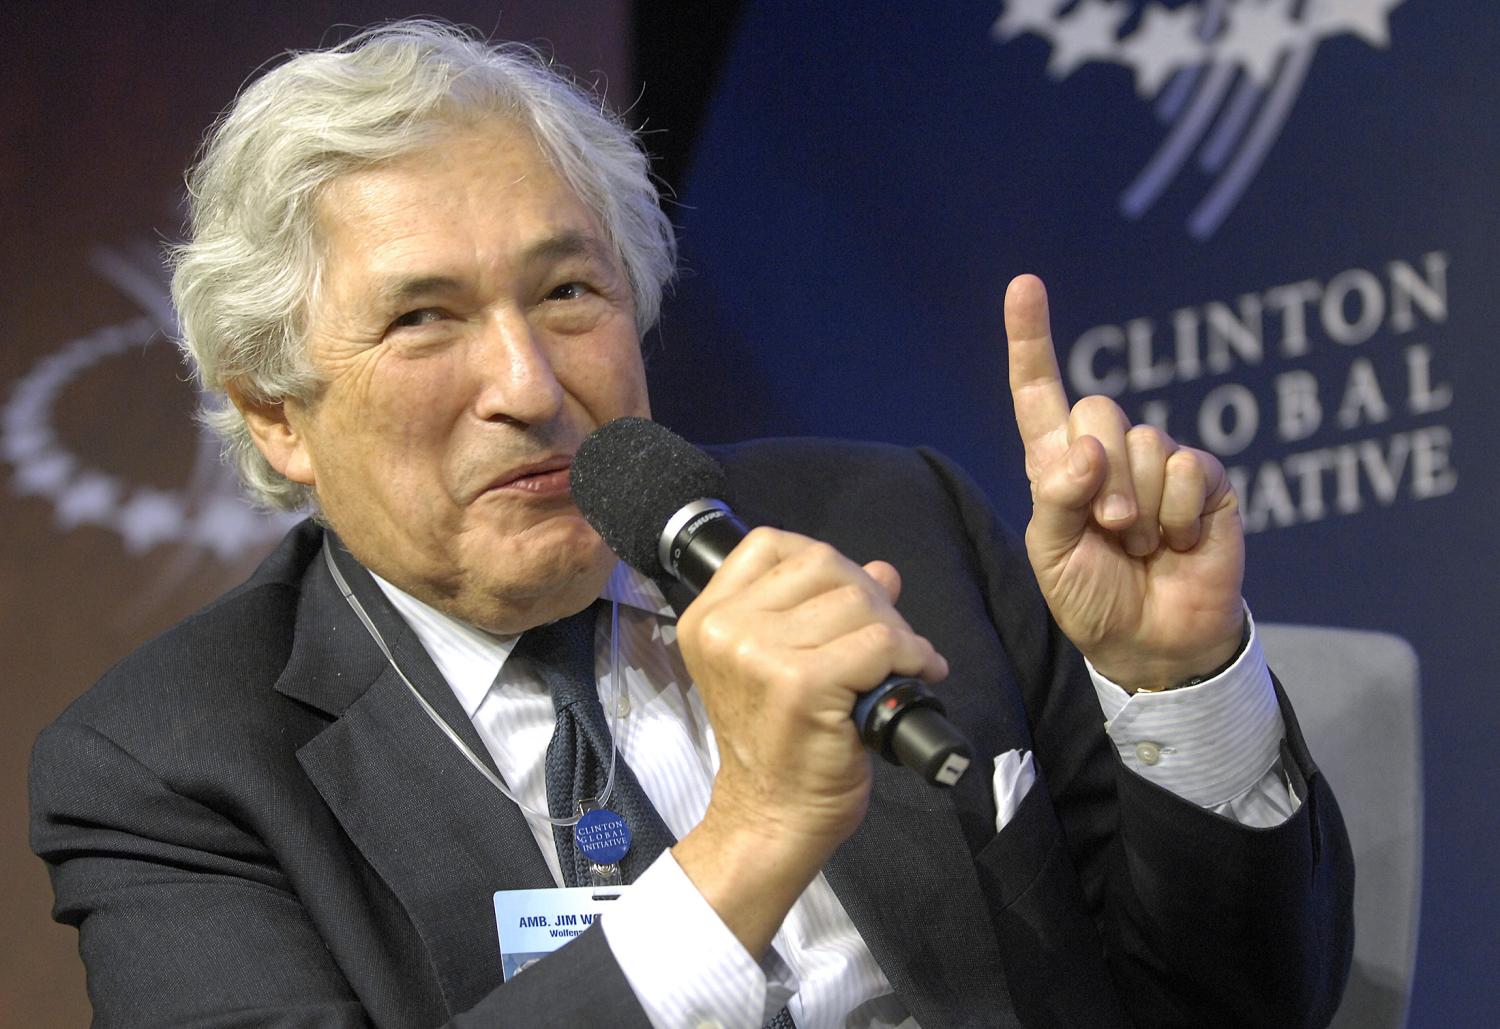 FILE PHOTO: Former head of the World Bank James Wolfensohn participates in a panel discussion about Poverty Alleviation at the Clinton Global Initiative in New York September 21, 2006.  REUTERS/Chip East